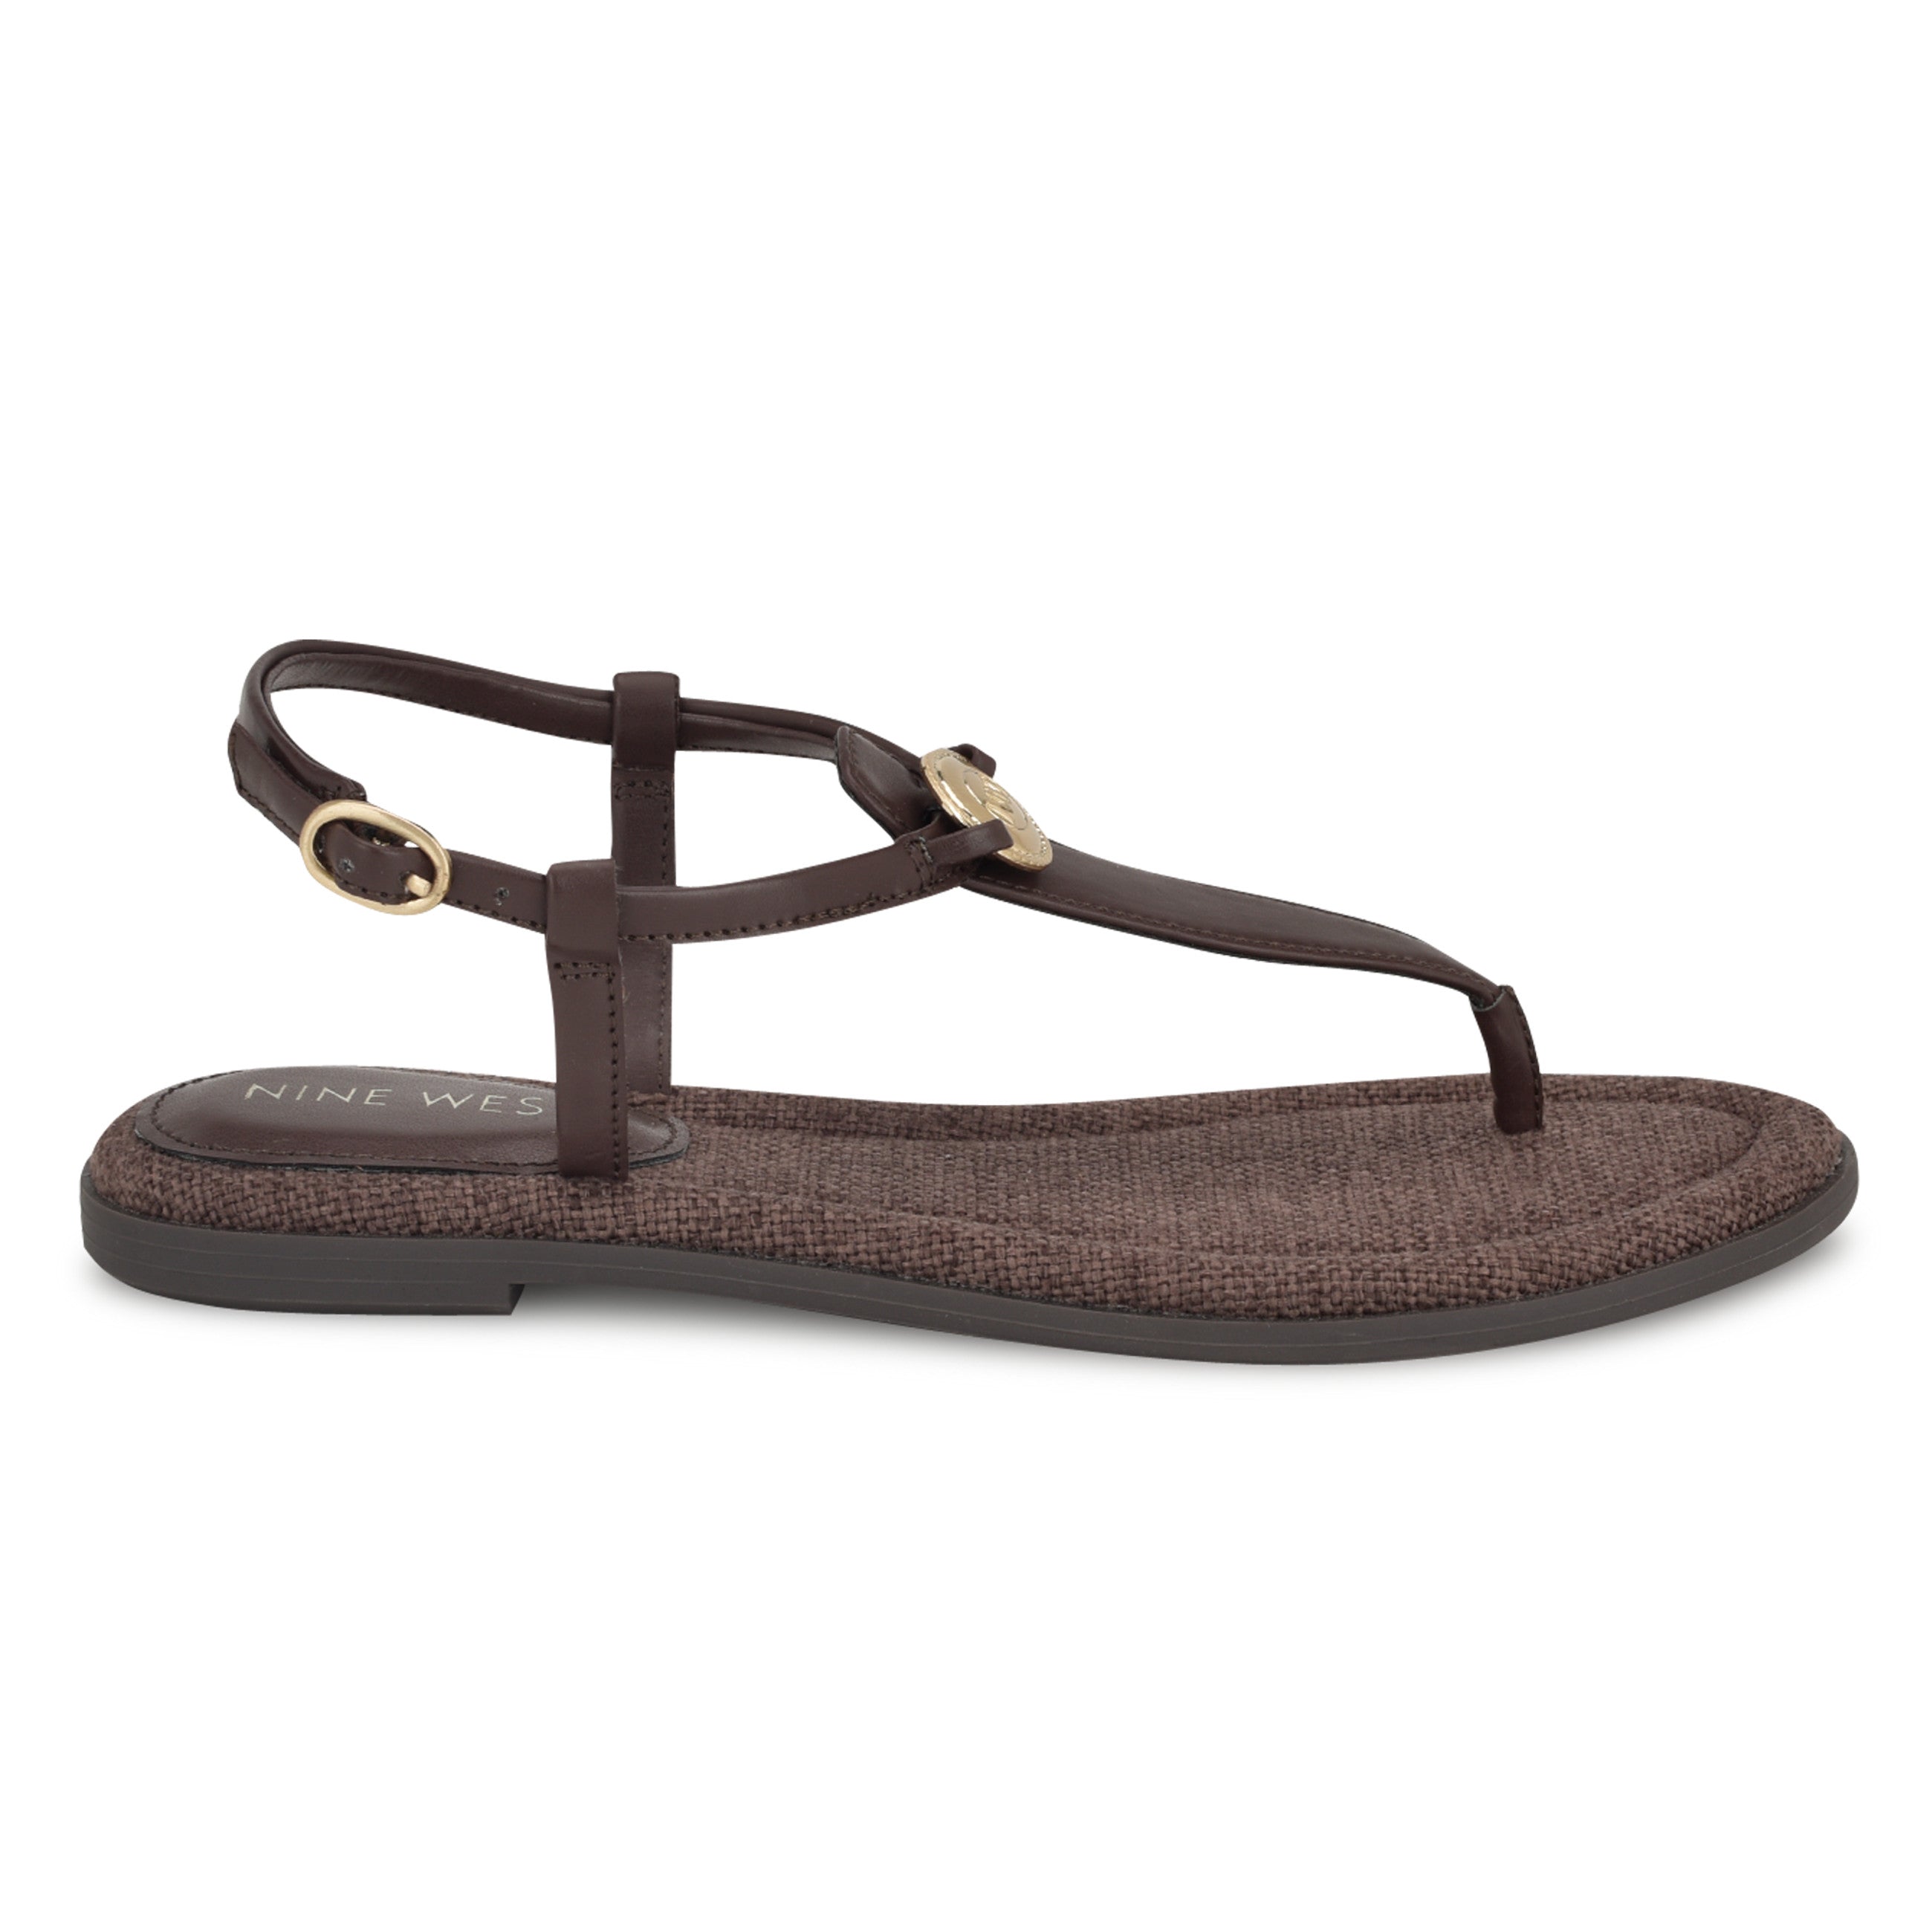 Dayna Casual Flat Sandals